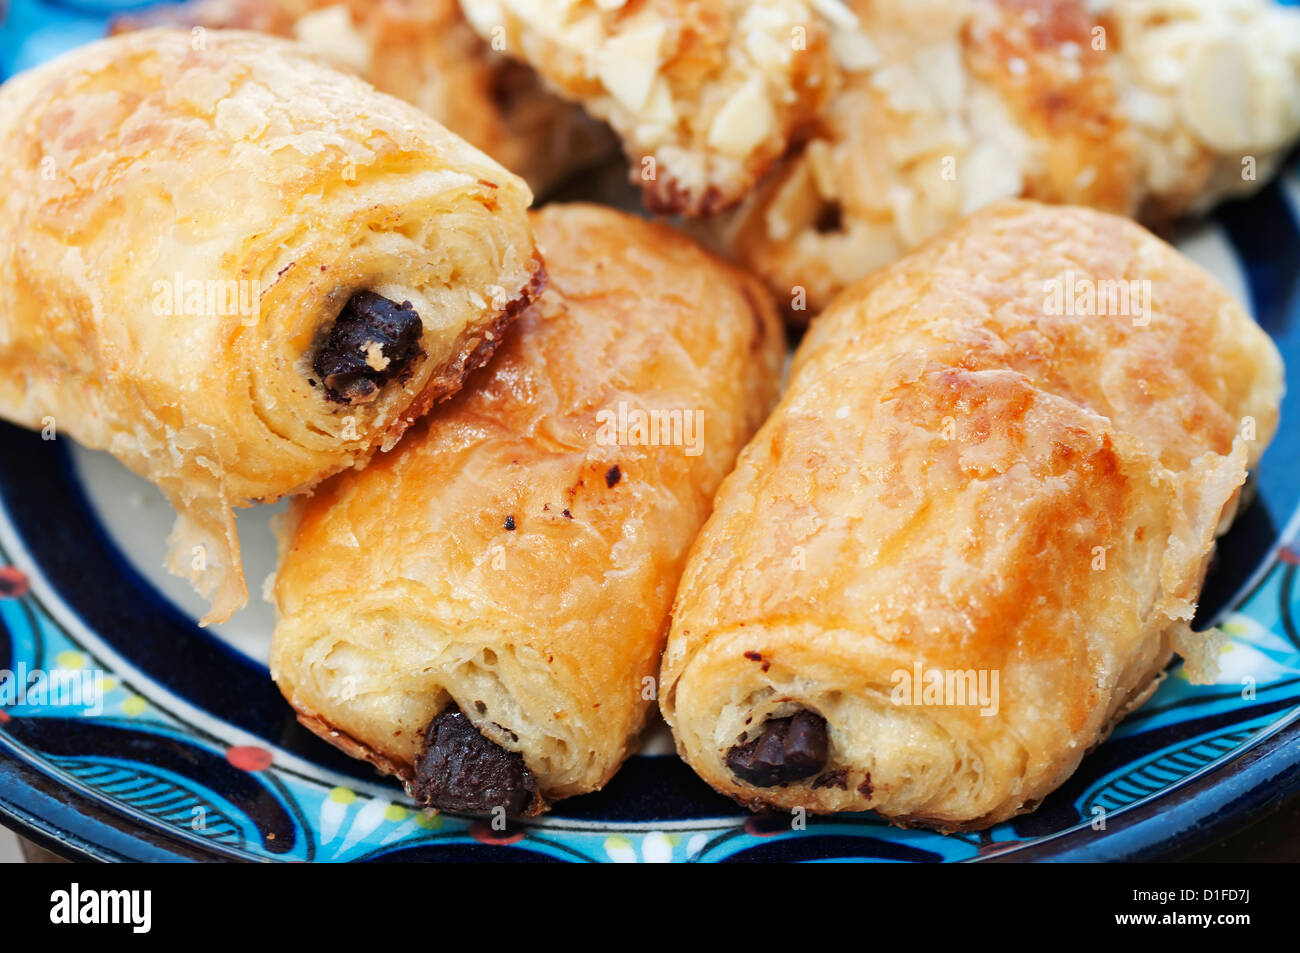 A plate filled with baked treats showcases miniature chocolate croissants. Stock Photo